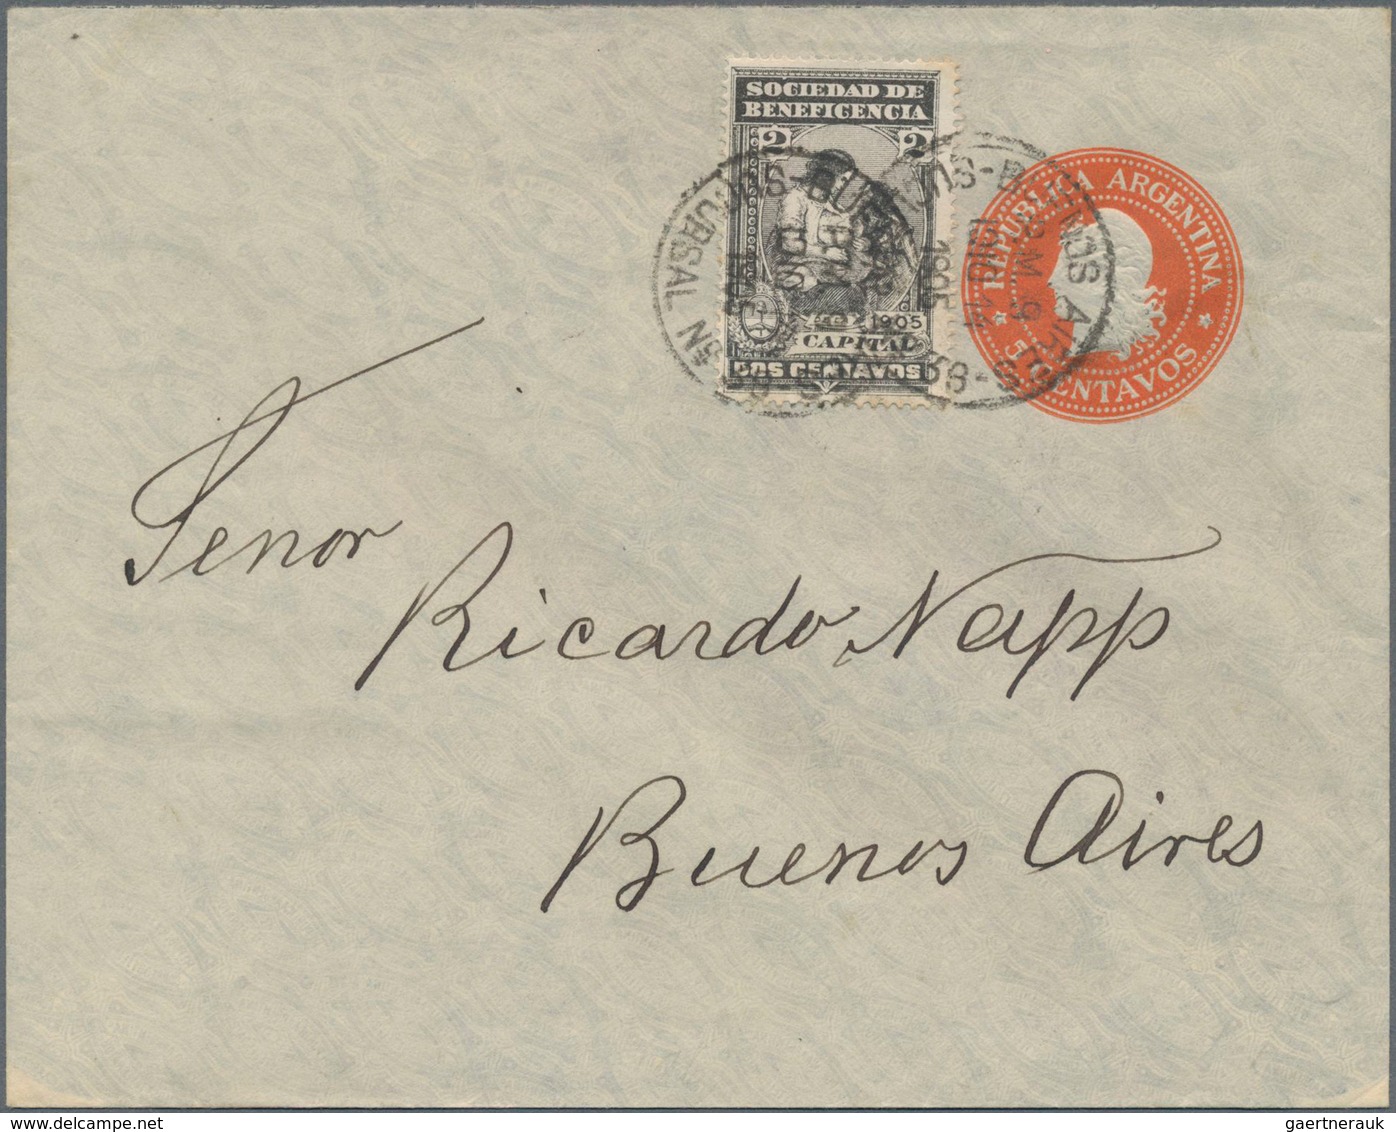 Argentinien - Ganzsachen: 1905 Commercially Local Used And Nice Uprated Postal Stationery Envelope 5 - Postal Stationery